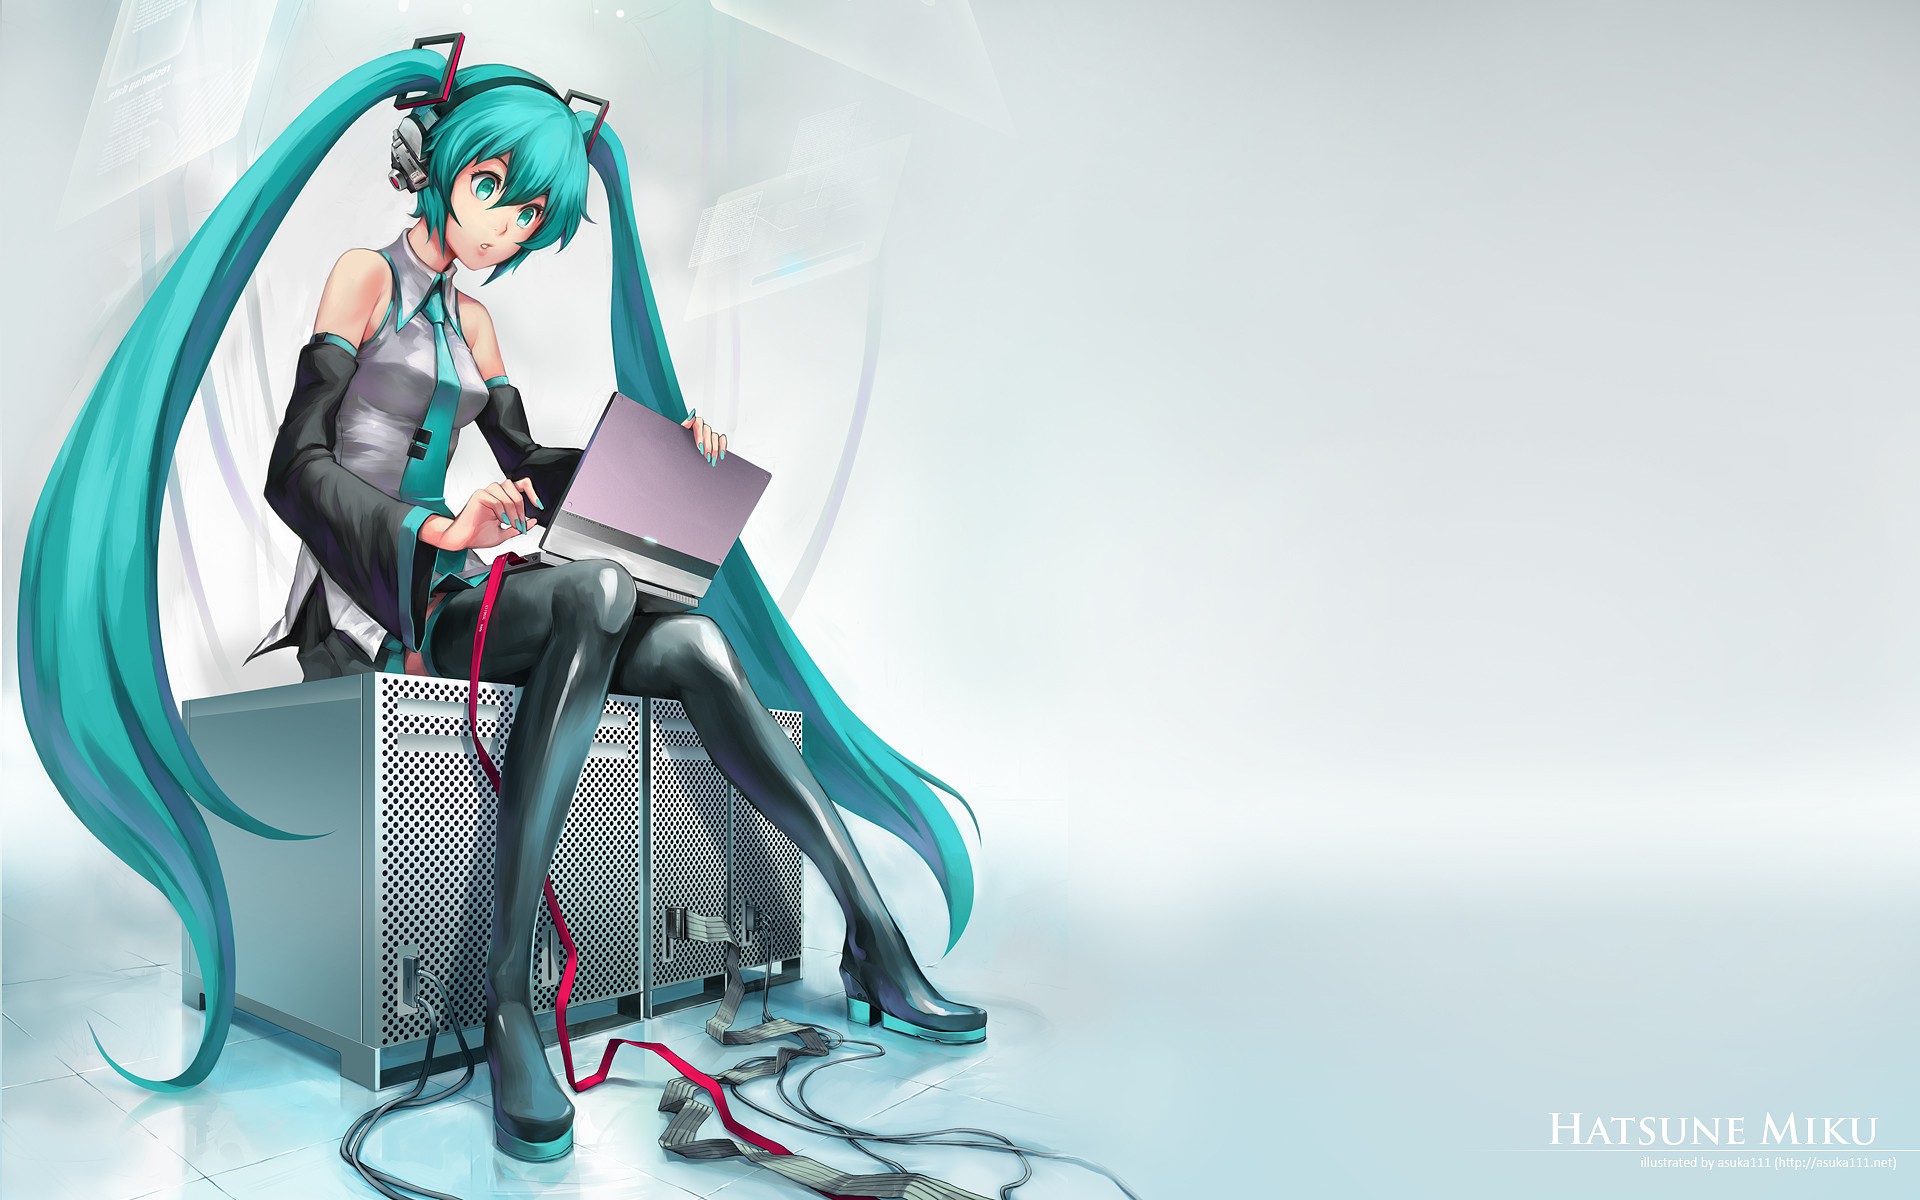 Anime 1920x1200 Hatsune Miku computer cables laptop sitting anime girls blue hair stockings anime cyan hair cyan simple background white background long hair turquoise hair legs together tie